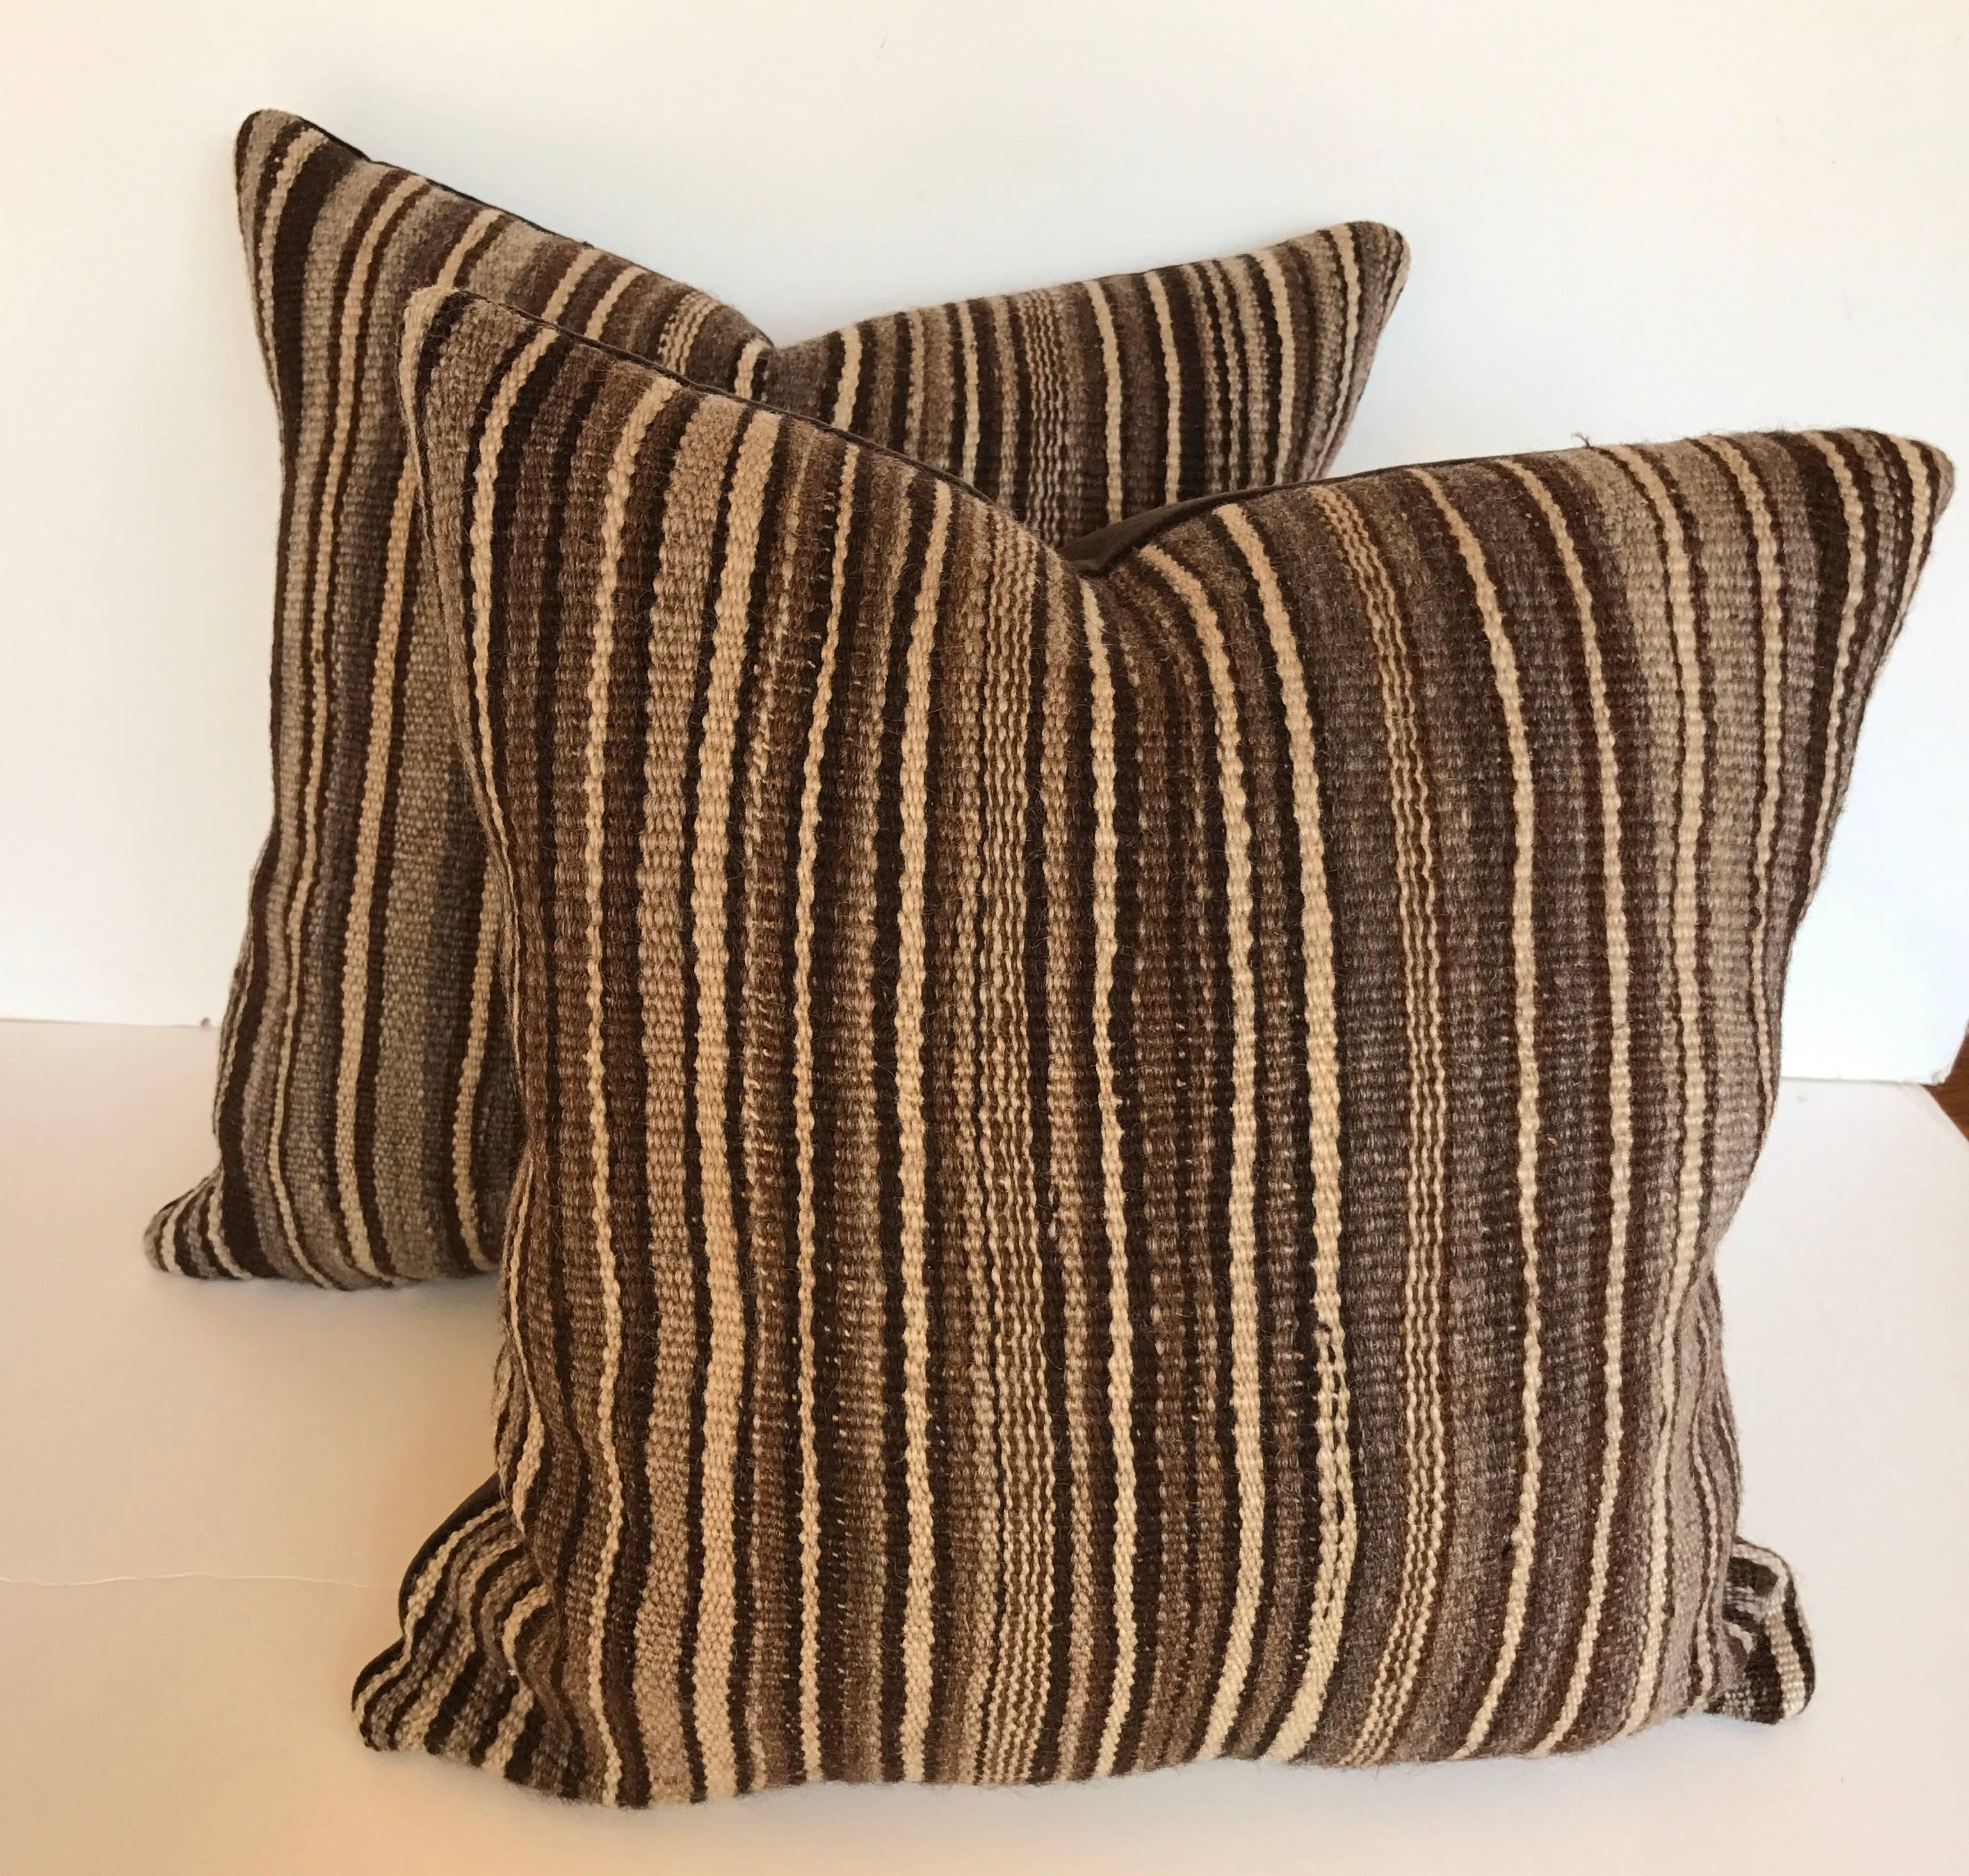 Custom pillows cut from a vintage hand loomed wool Moroccan Berber rug from the Atlas Mountains. Wool is soft and lustrous with stripes in natural colors of charcoal, grays, and brown. Pillows are backed in a dark brown velvet, filled with an inset